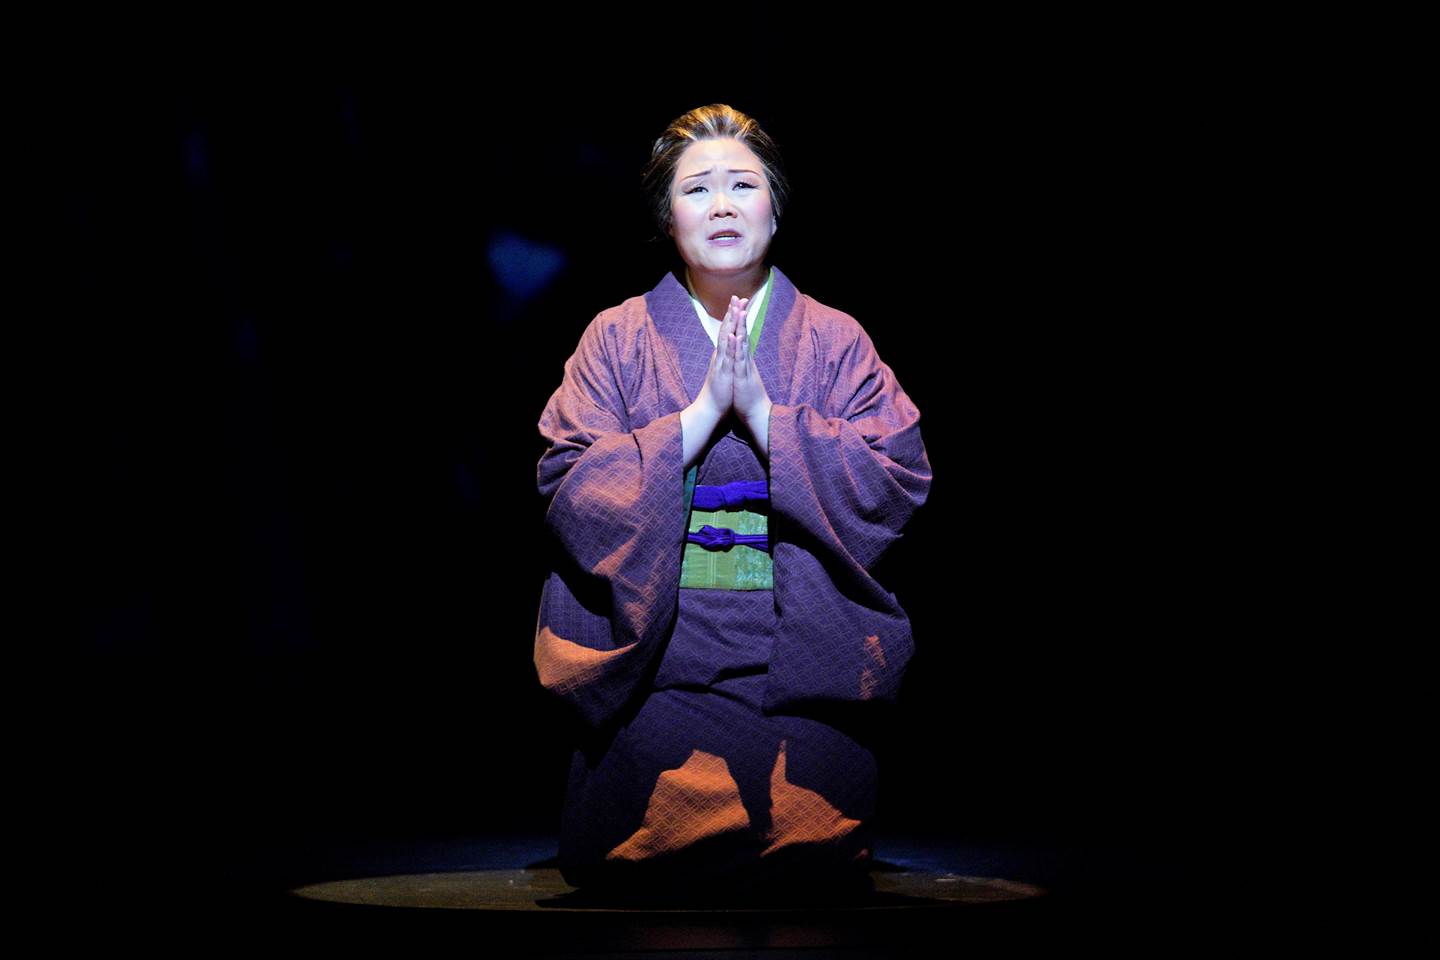 Madame Butterfly kneeling with praying hands